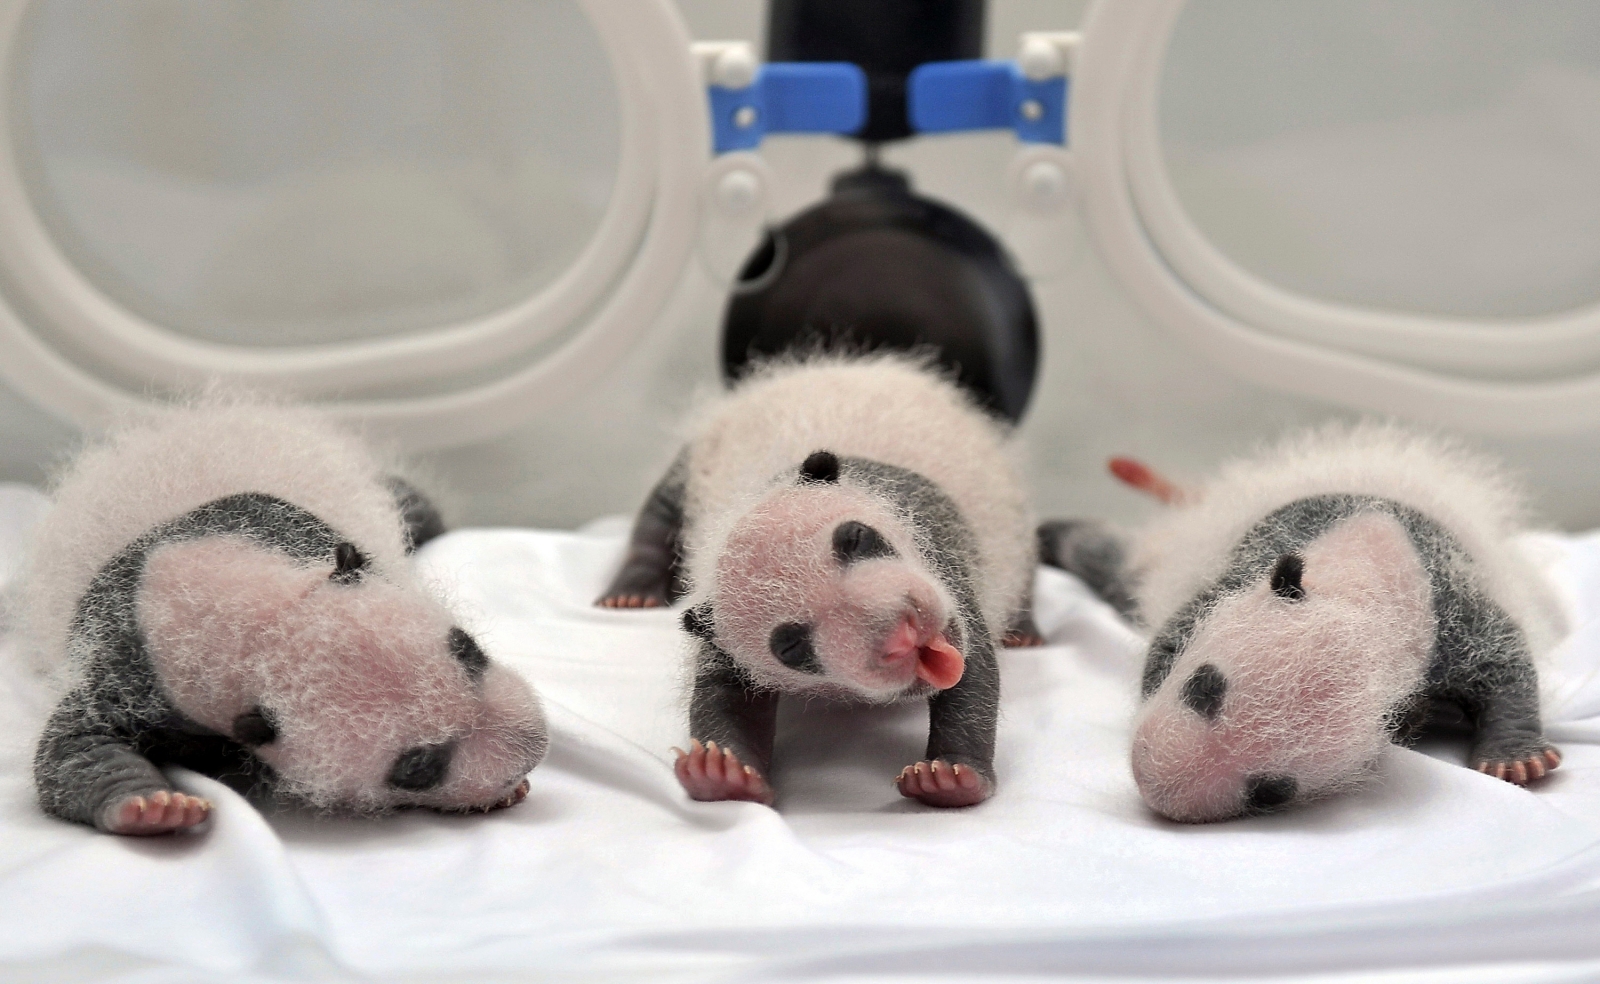 Newborn giant panda triplets are cared for in an incubator at the Chimelong Safari Park in Guangzhou, Guangdong province, China